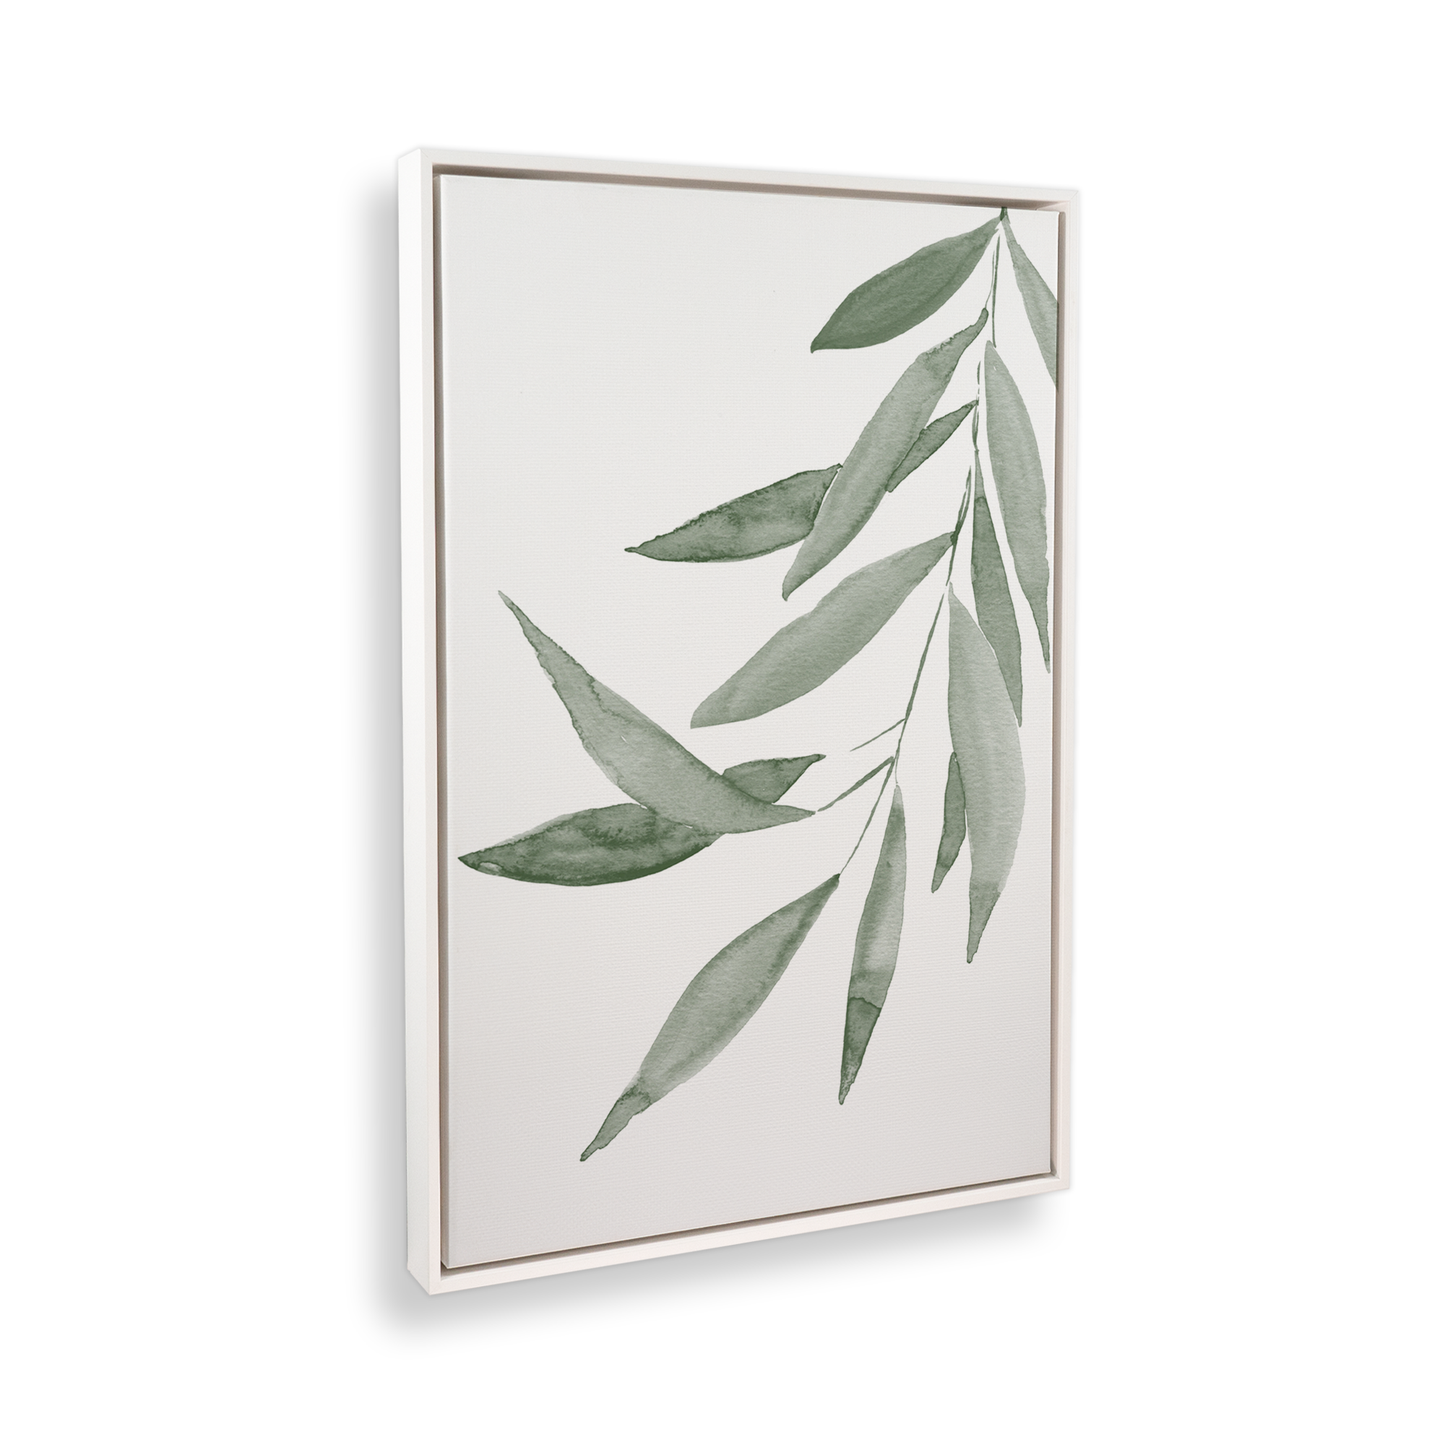 [color:Opaque White], Picture of art in a black frame at angle